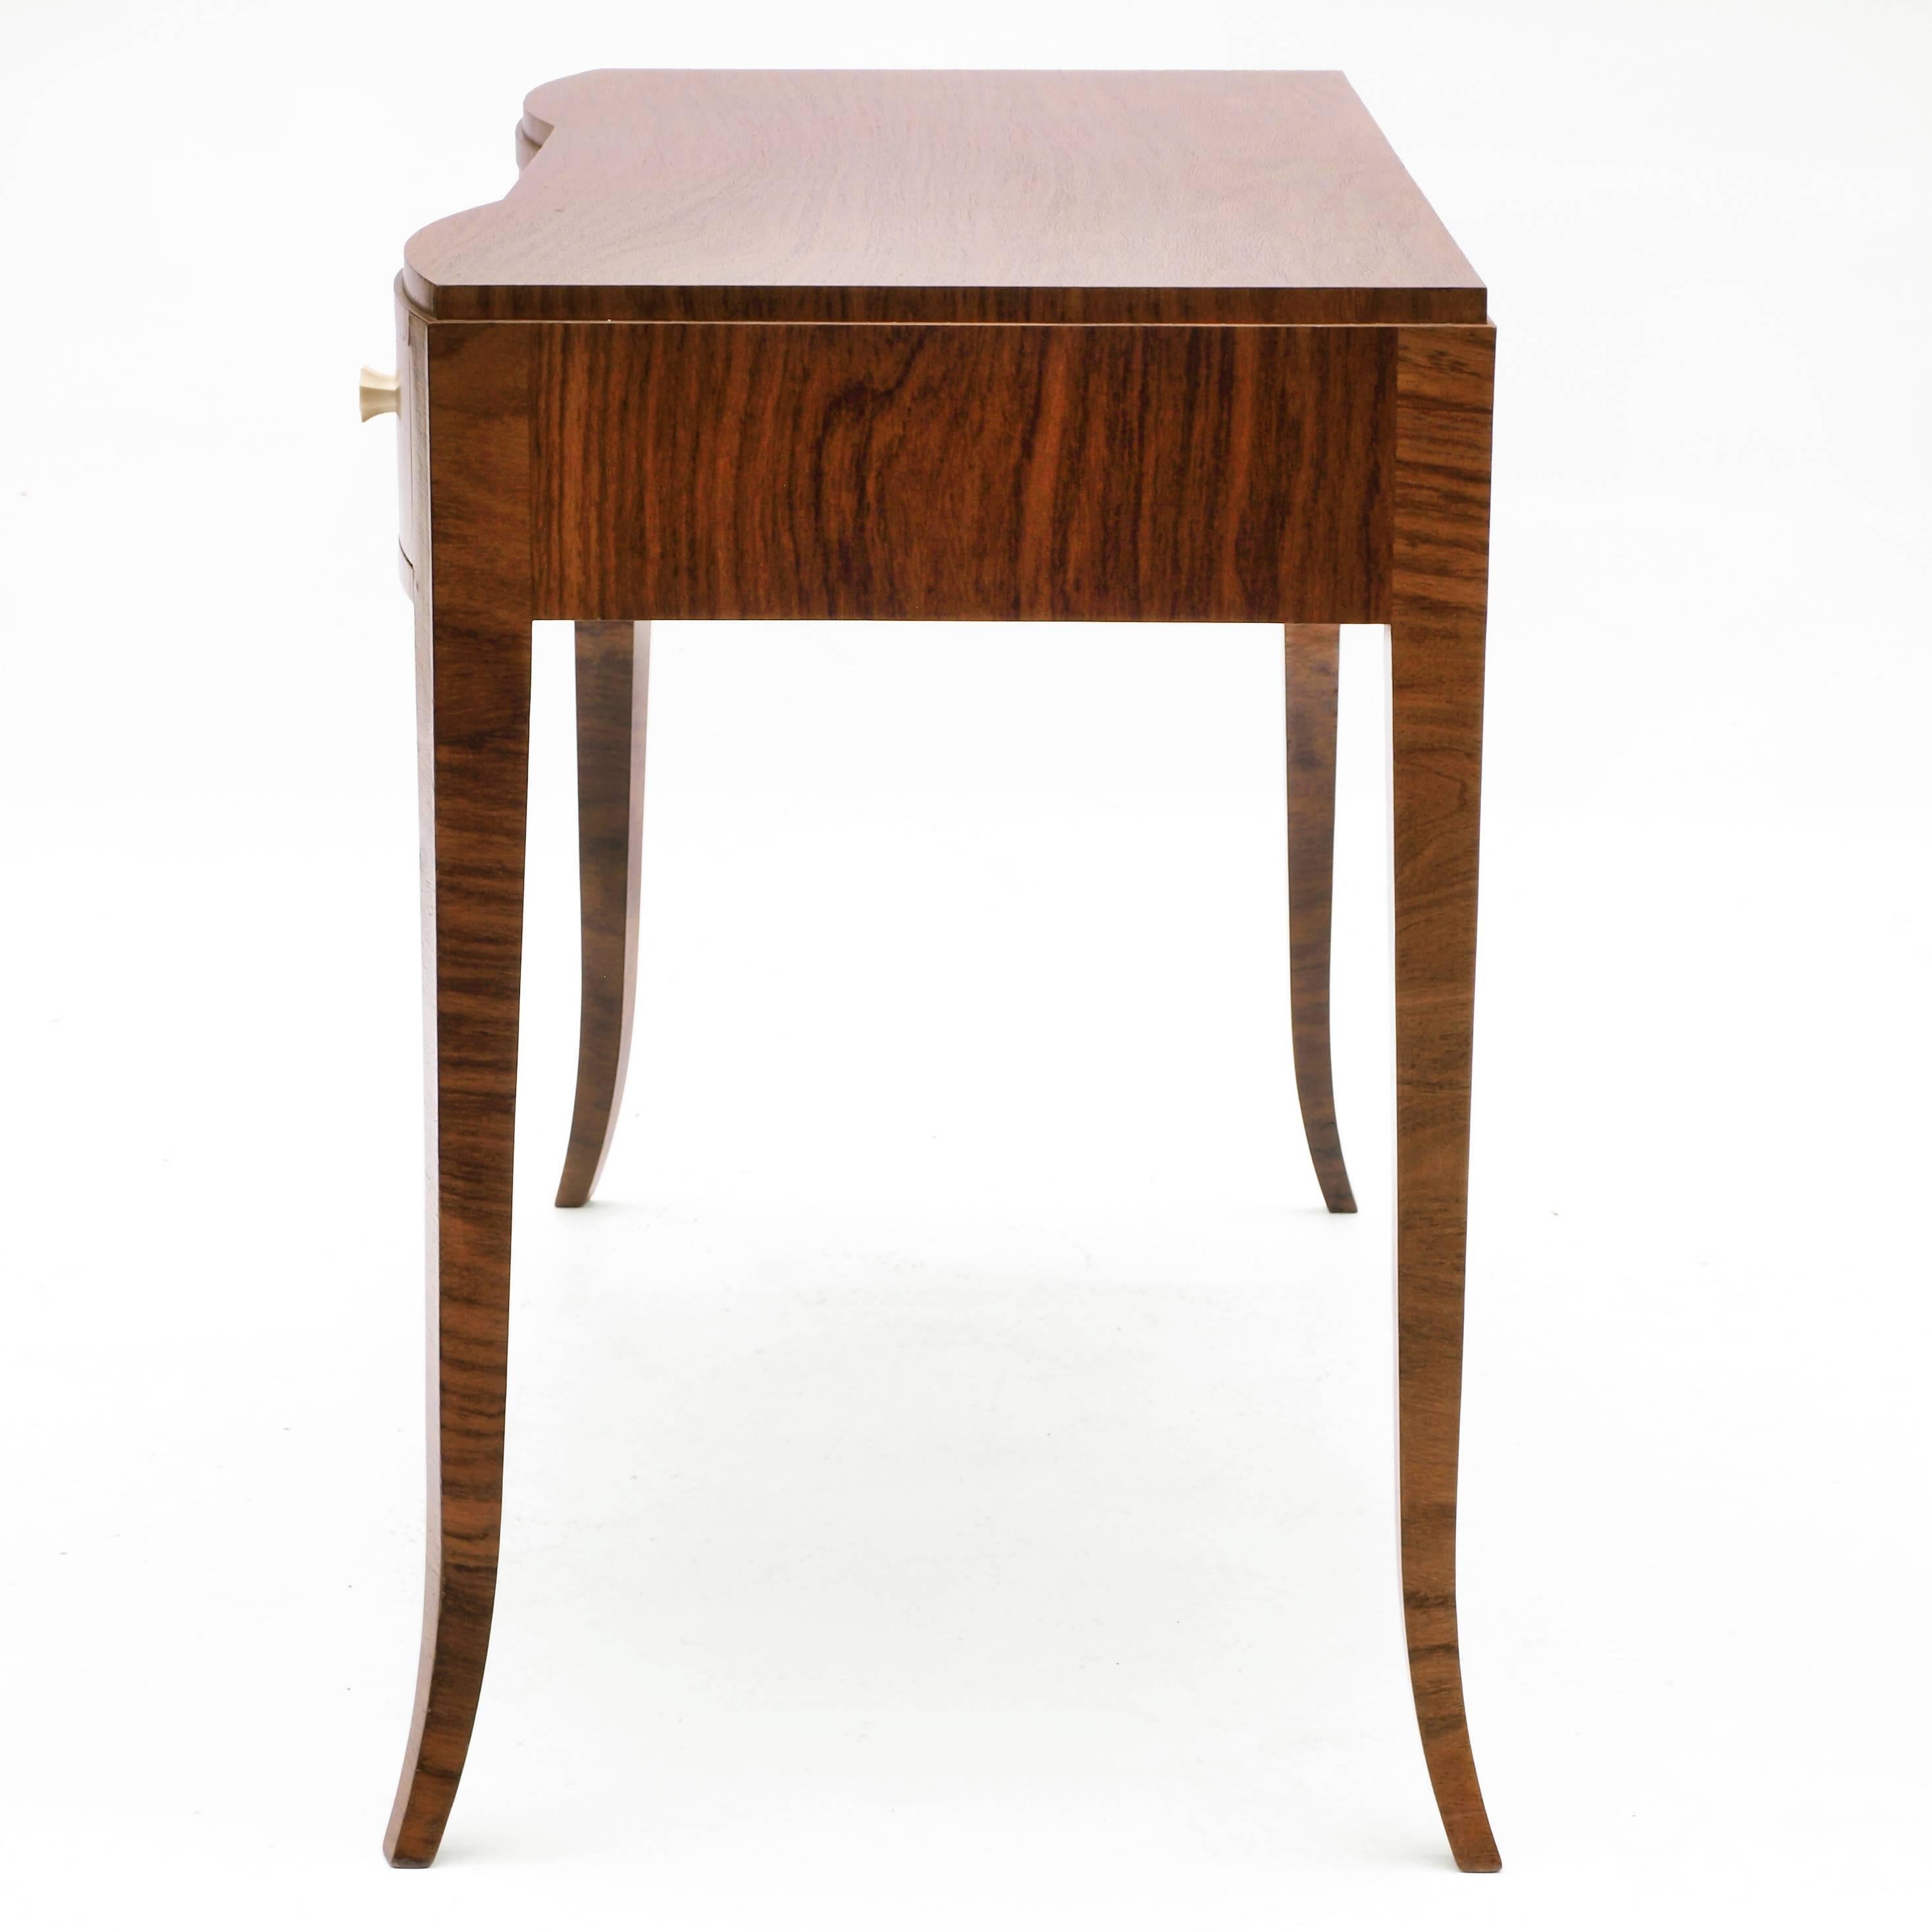 Early 20th Century Writing Desk by Andre Domin & Marcel Genevriere for Maison Dominique, circa 1920